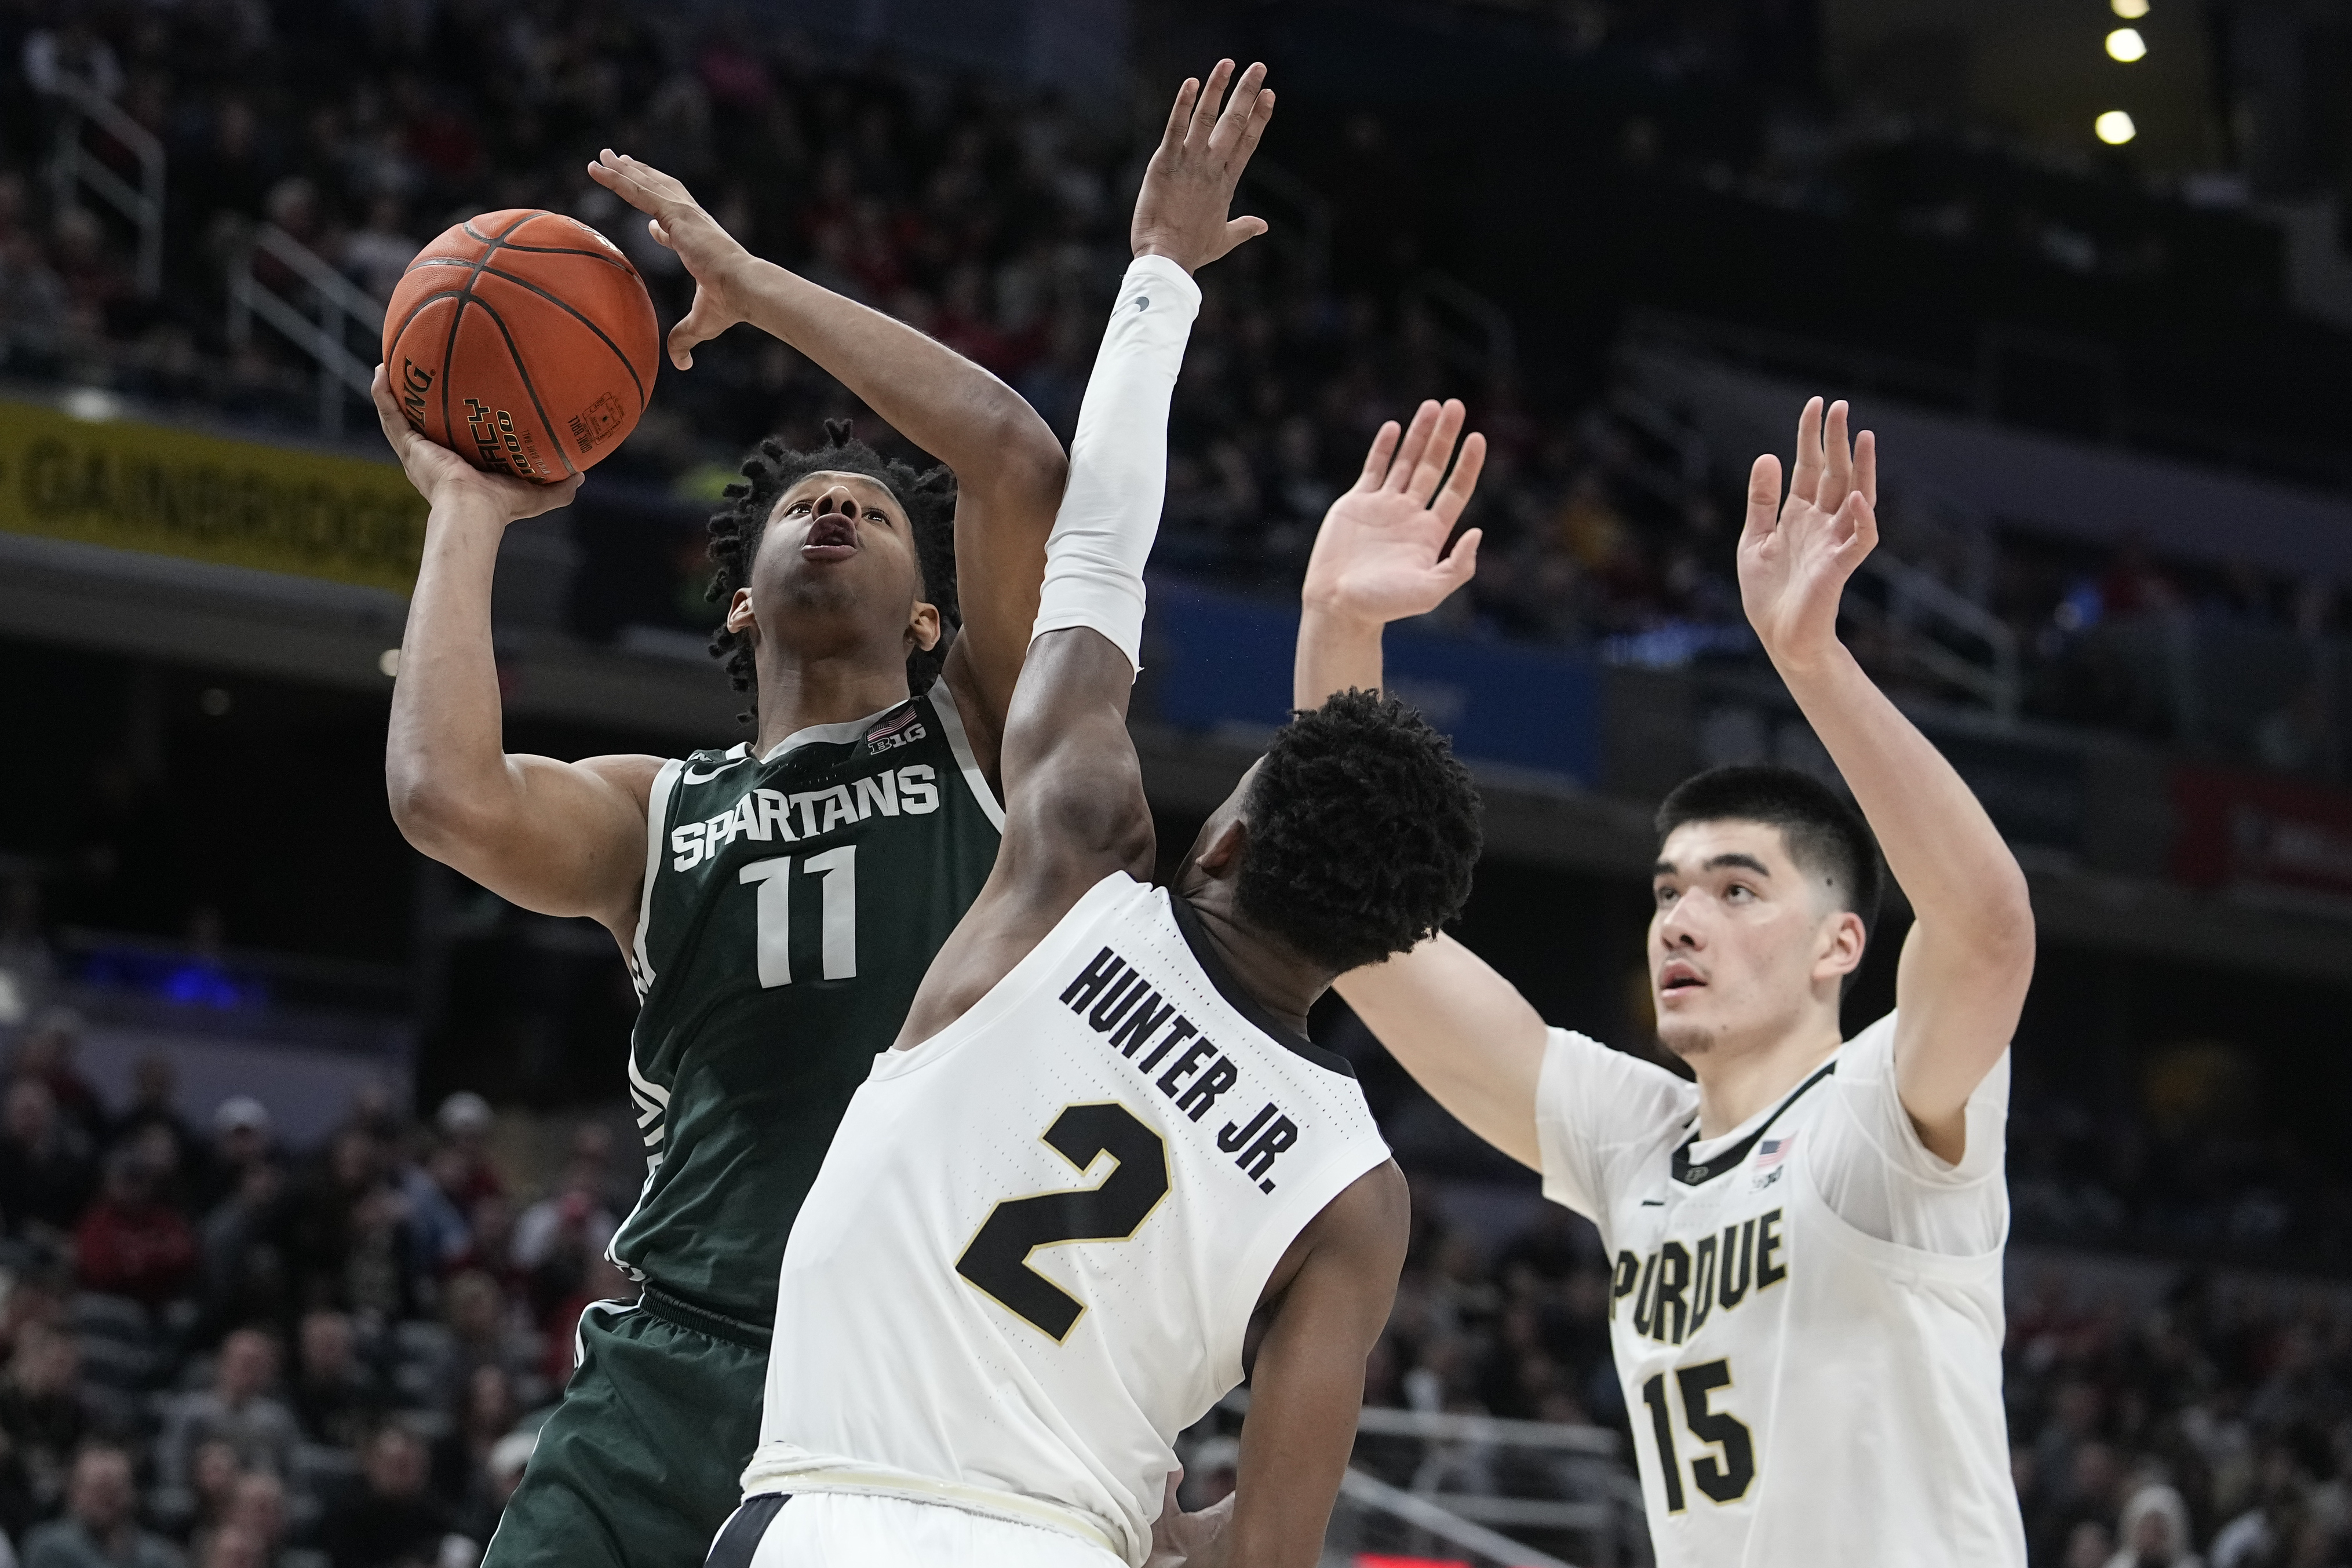 NCAA Selection Sunday 2022 live stream How to watch March Madness bracket reveal online, TV, time